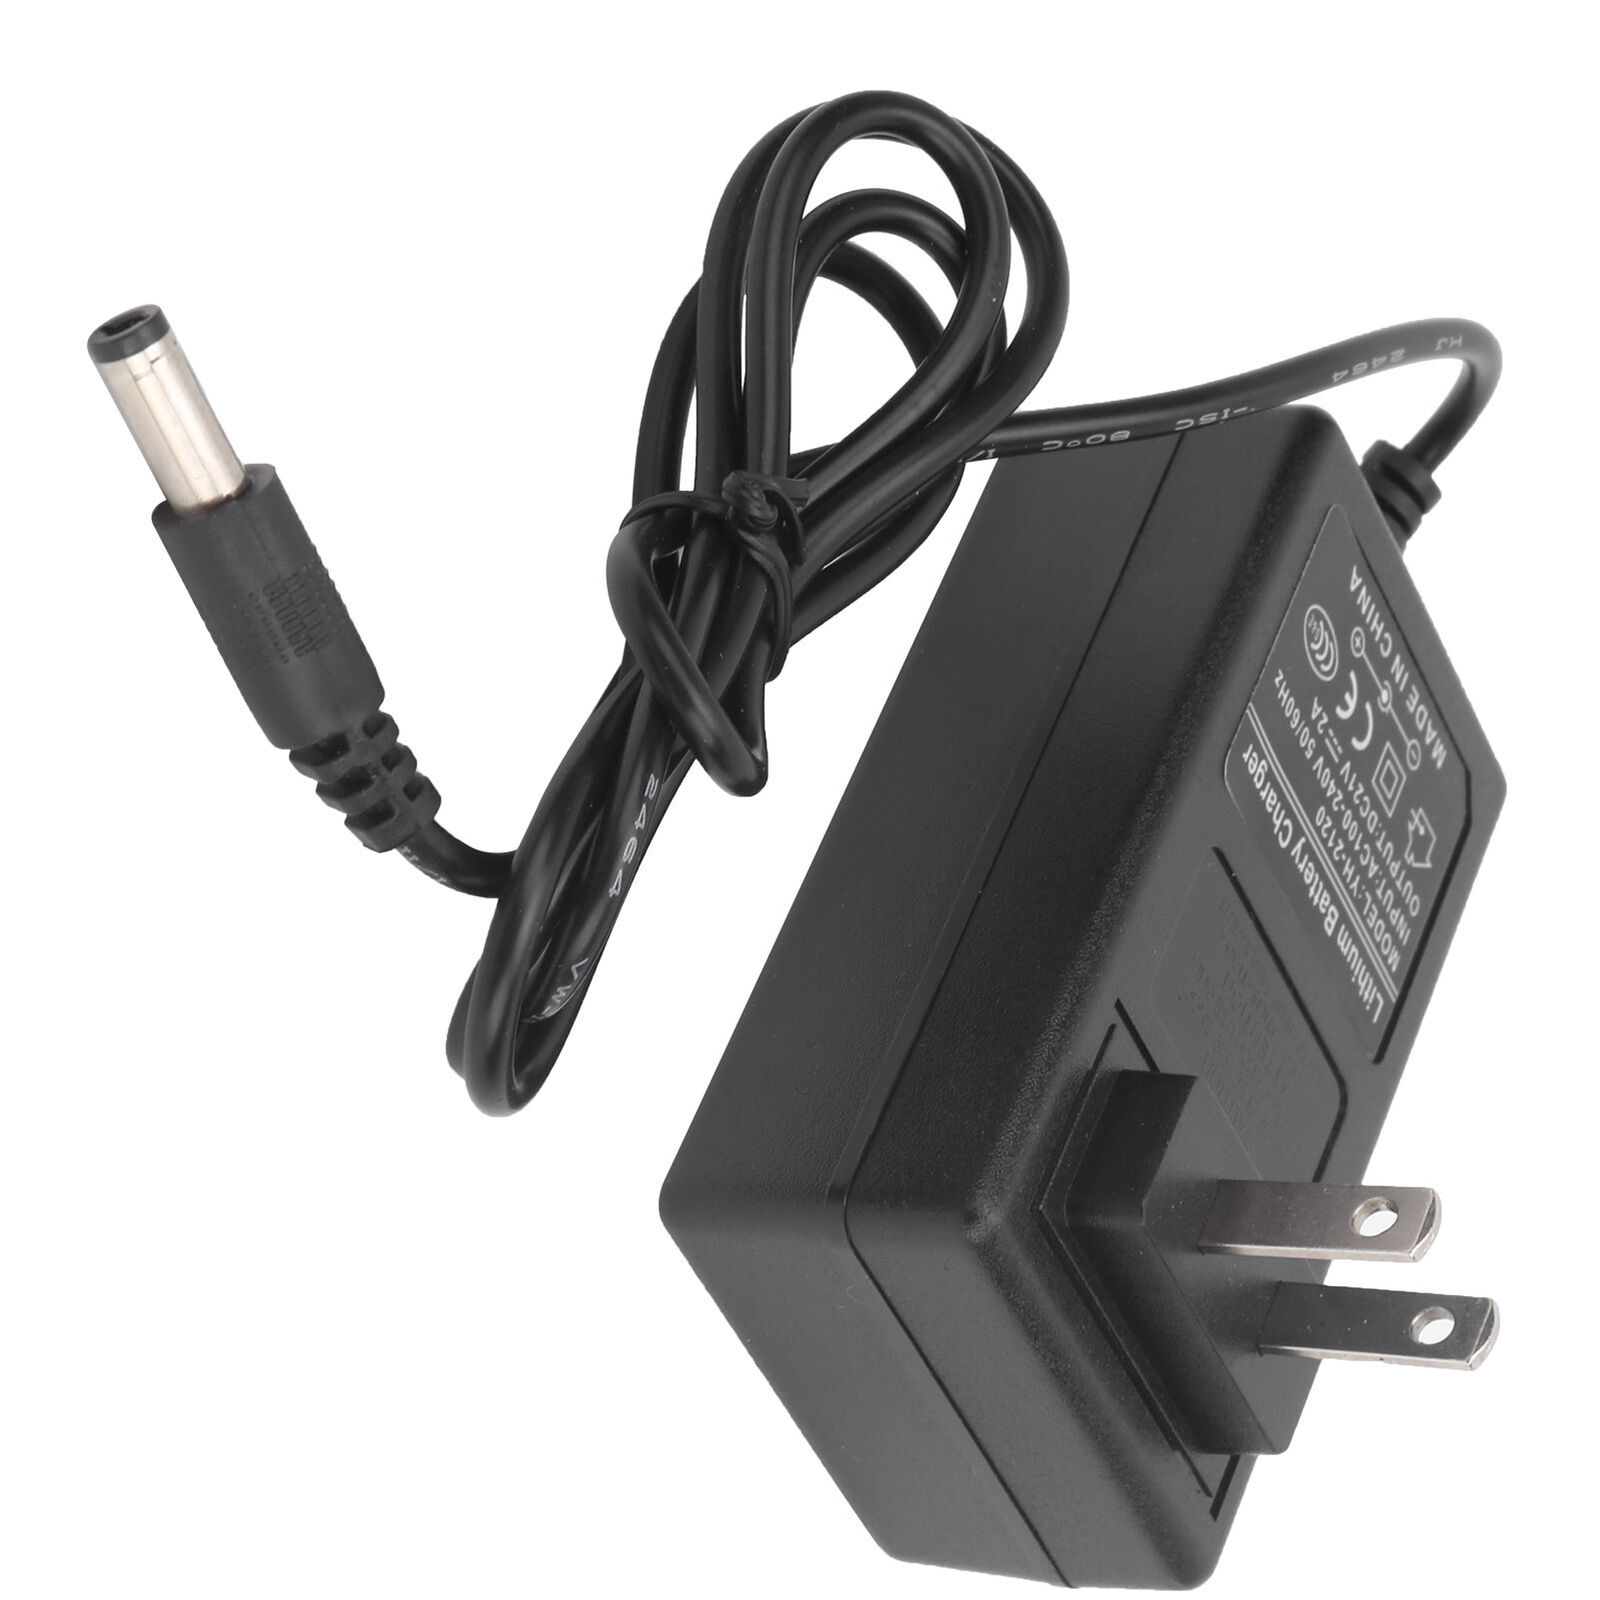 Genuine Philips AC Adapter for FC6407 FC6408 FC6409 FC6171 FC6170 Vacuum Cleanr Compatible Brand For Philips Brand Ph